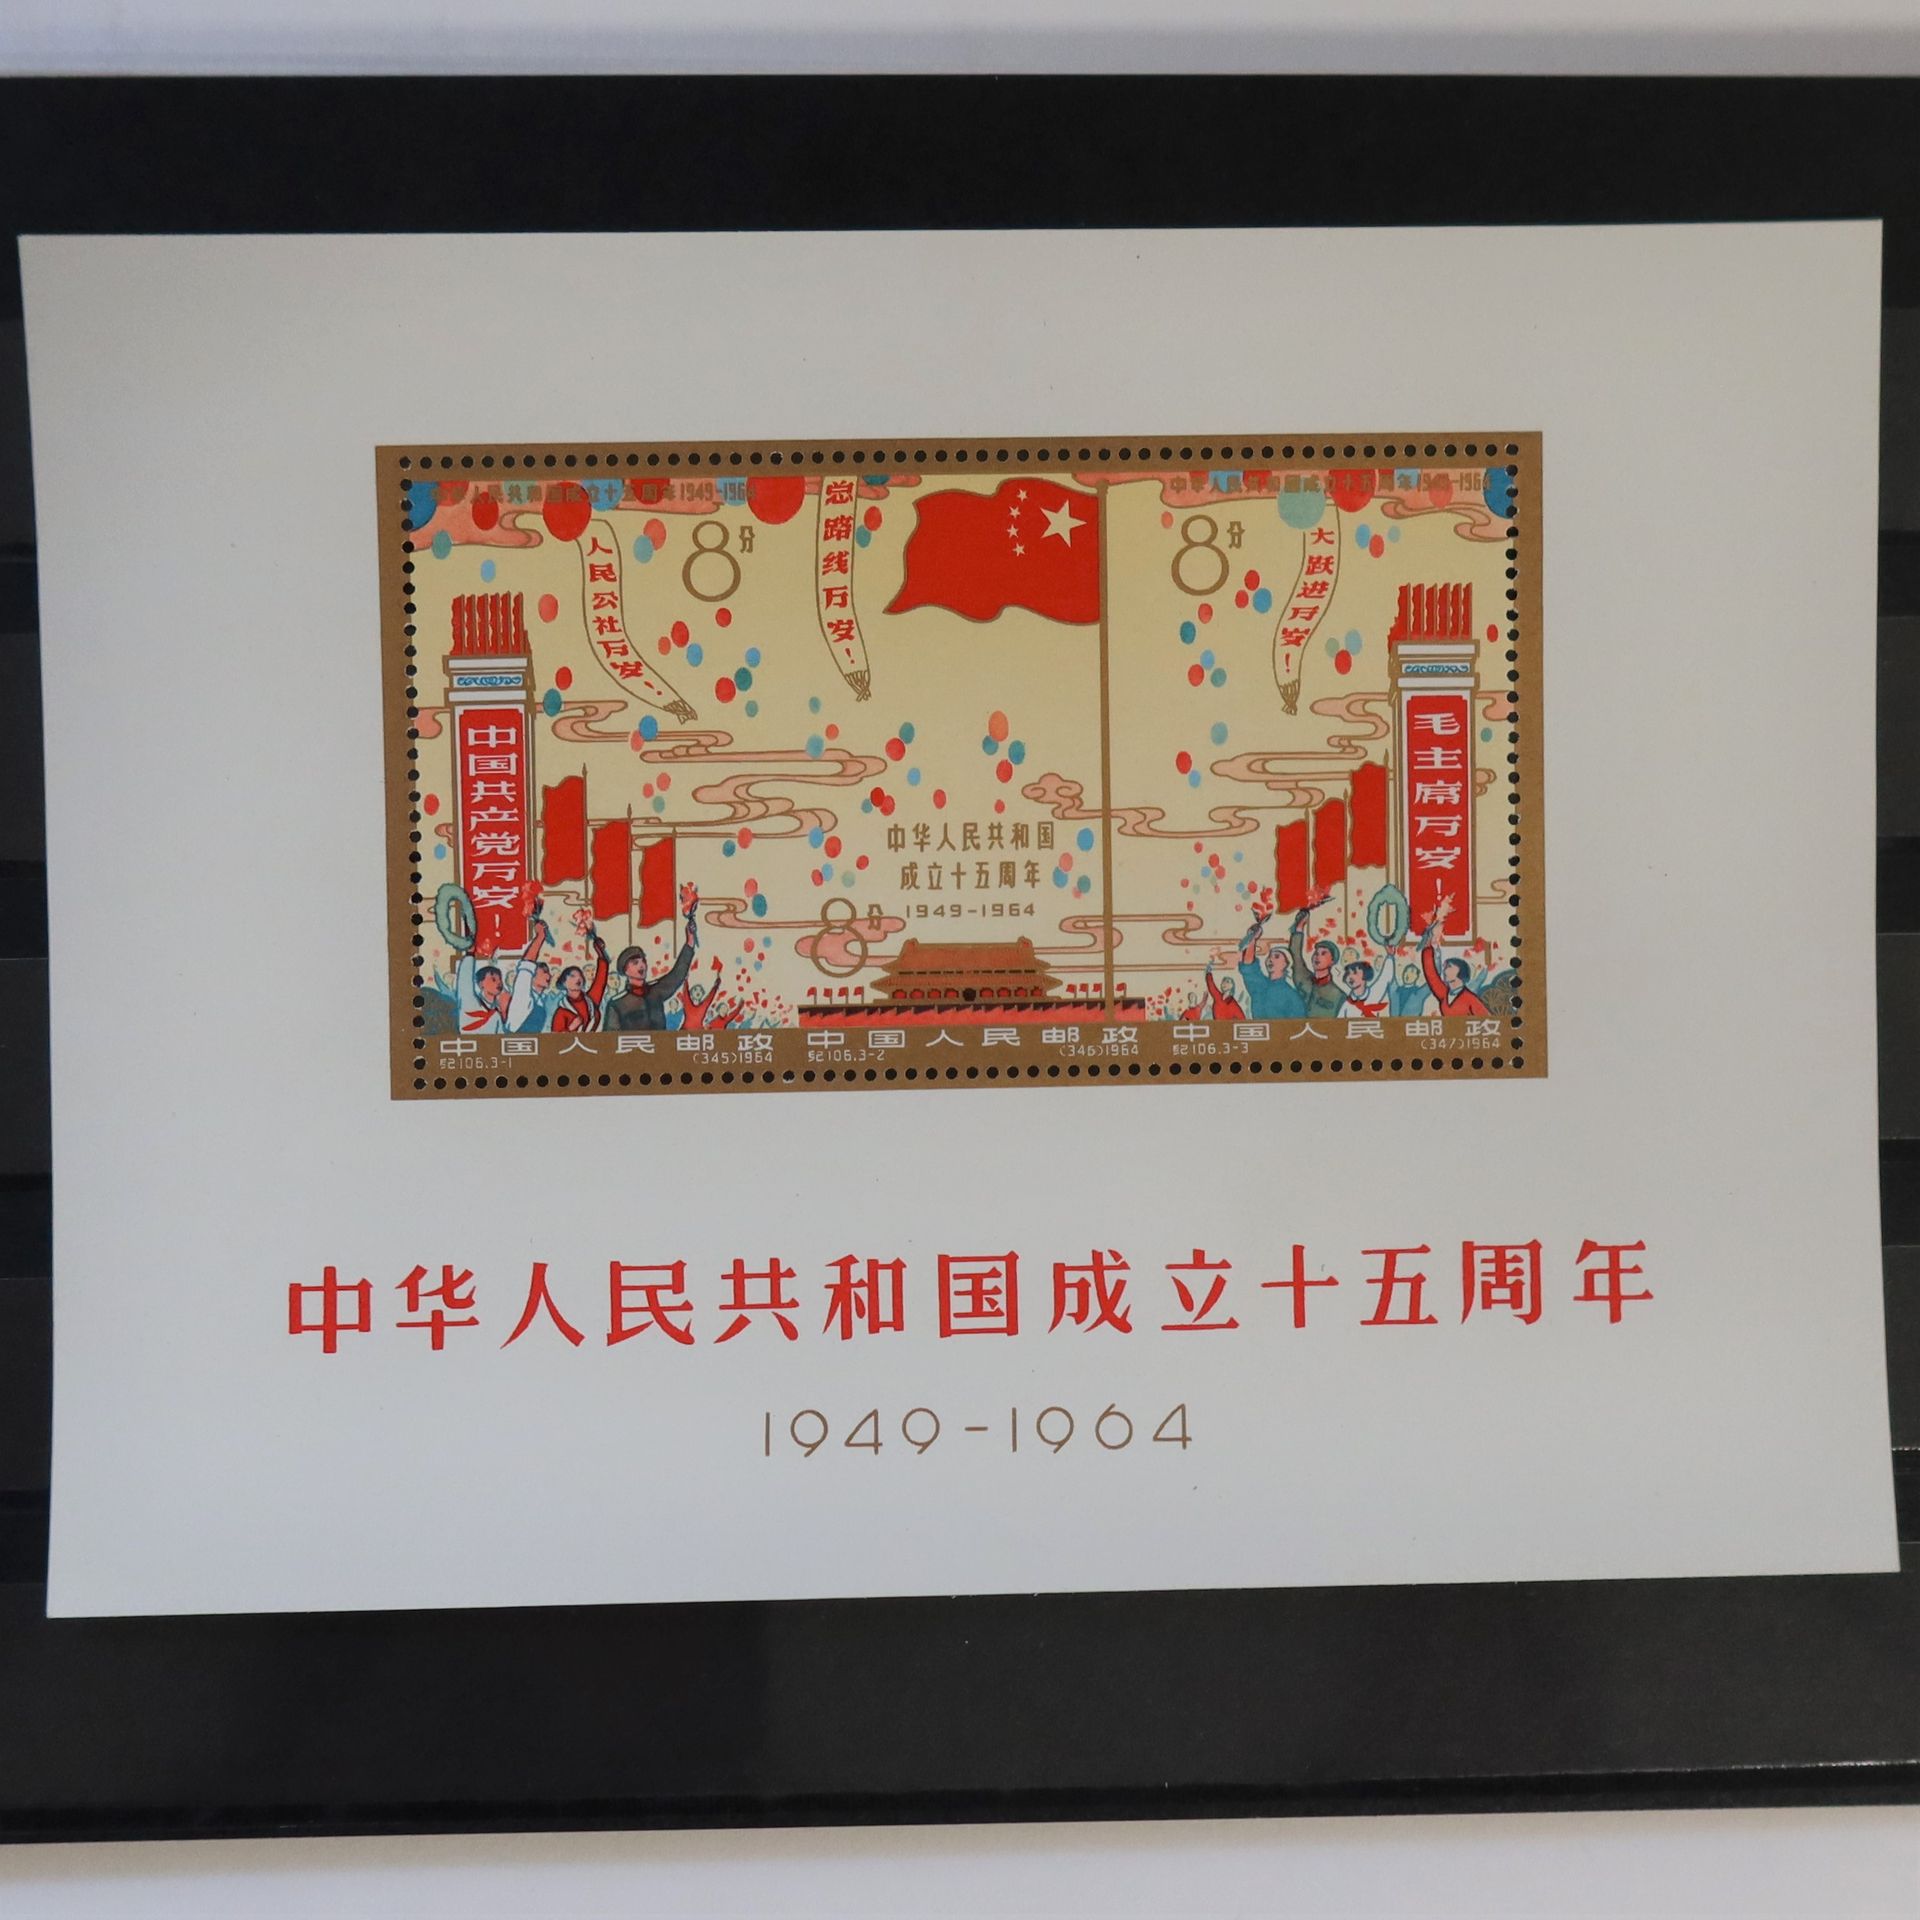 Null [CHINA]
Superb block n°13 "15th anniversary of the Republic", new, luxury.